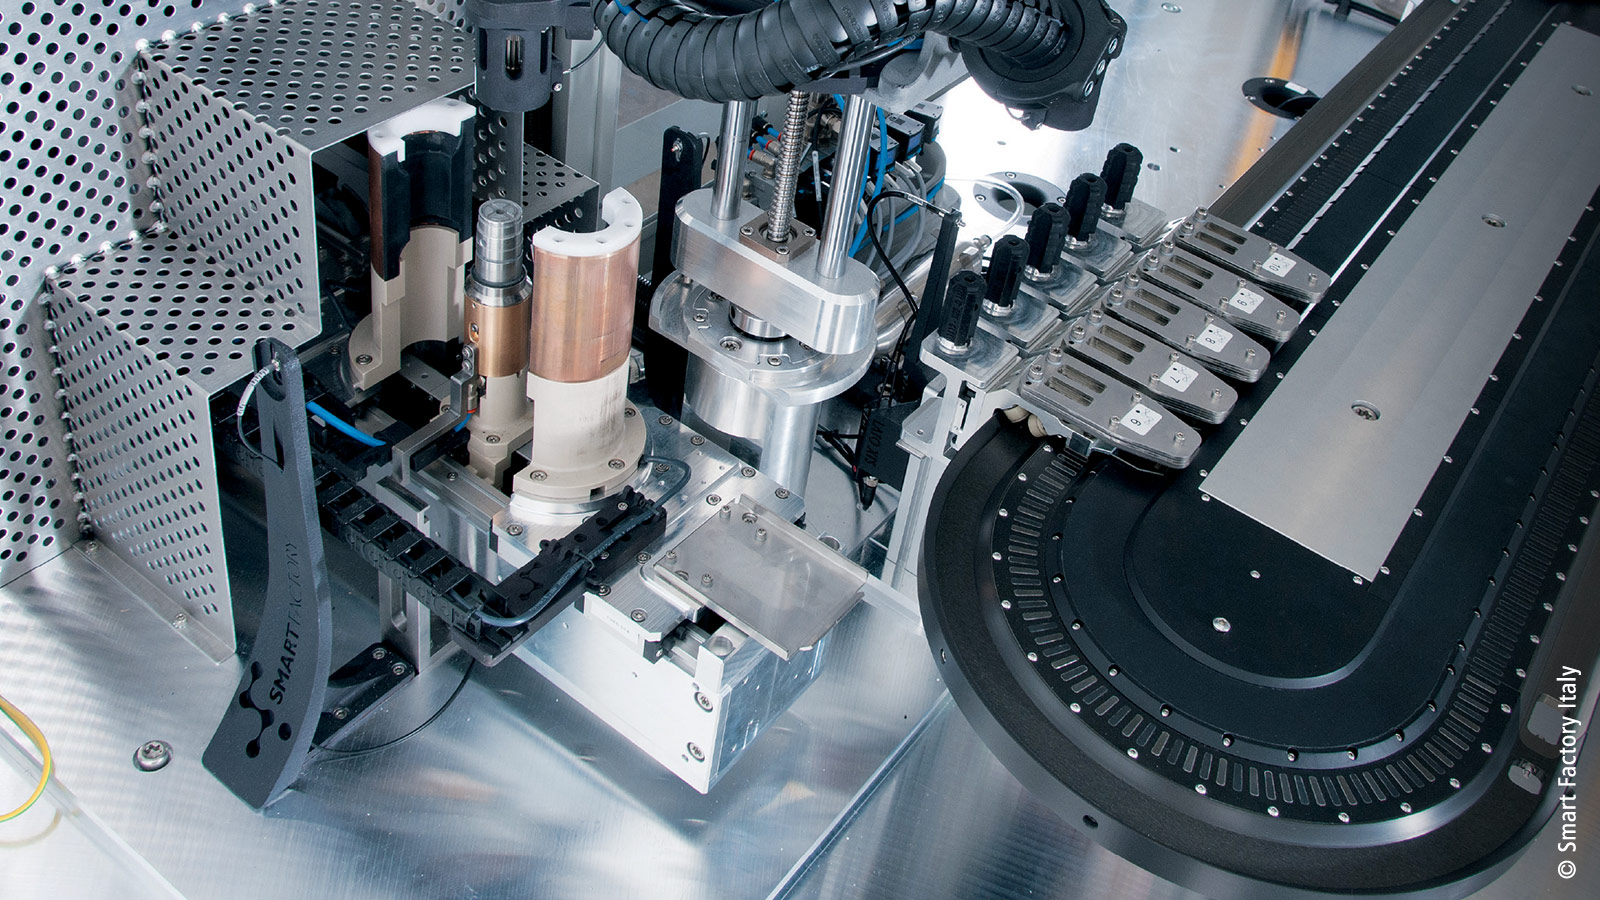 The XTS eXtended transport system is the centerpiece of the Flexim solution. It can be connected to different processing modules in order to implement matching system configurations for varying assembly or machining processes quickly and flexibly.  